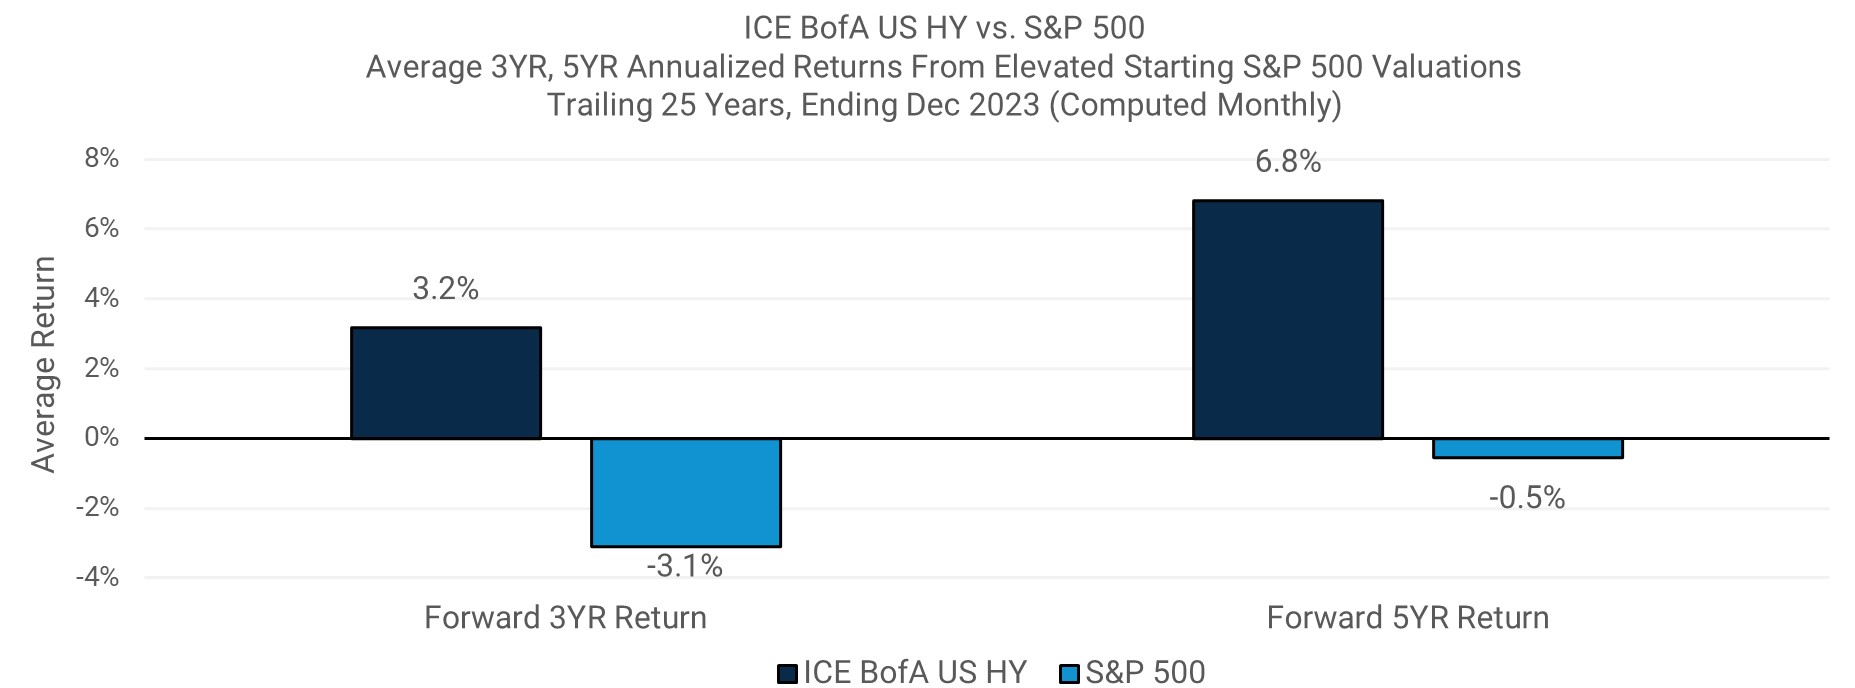 ICE BofA US HY vs. S&P 500 Average 3YR, 5YR Annualized Returns From Elevated Starting S&P 500 Valuations Trailing 25 Years, Ending Dec 2023 (Computed Monthly)